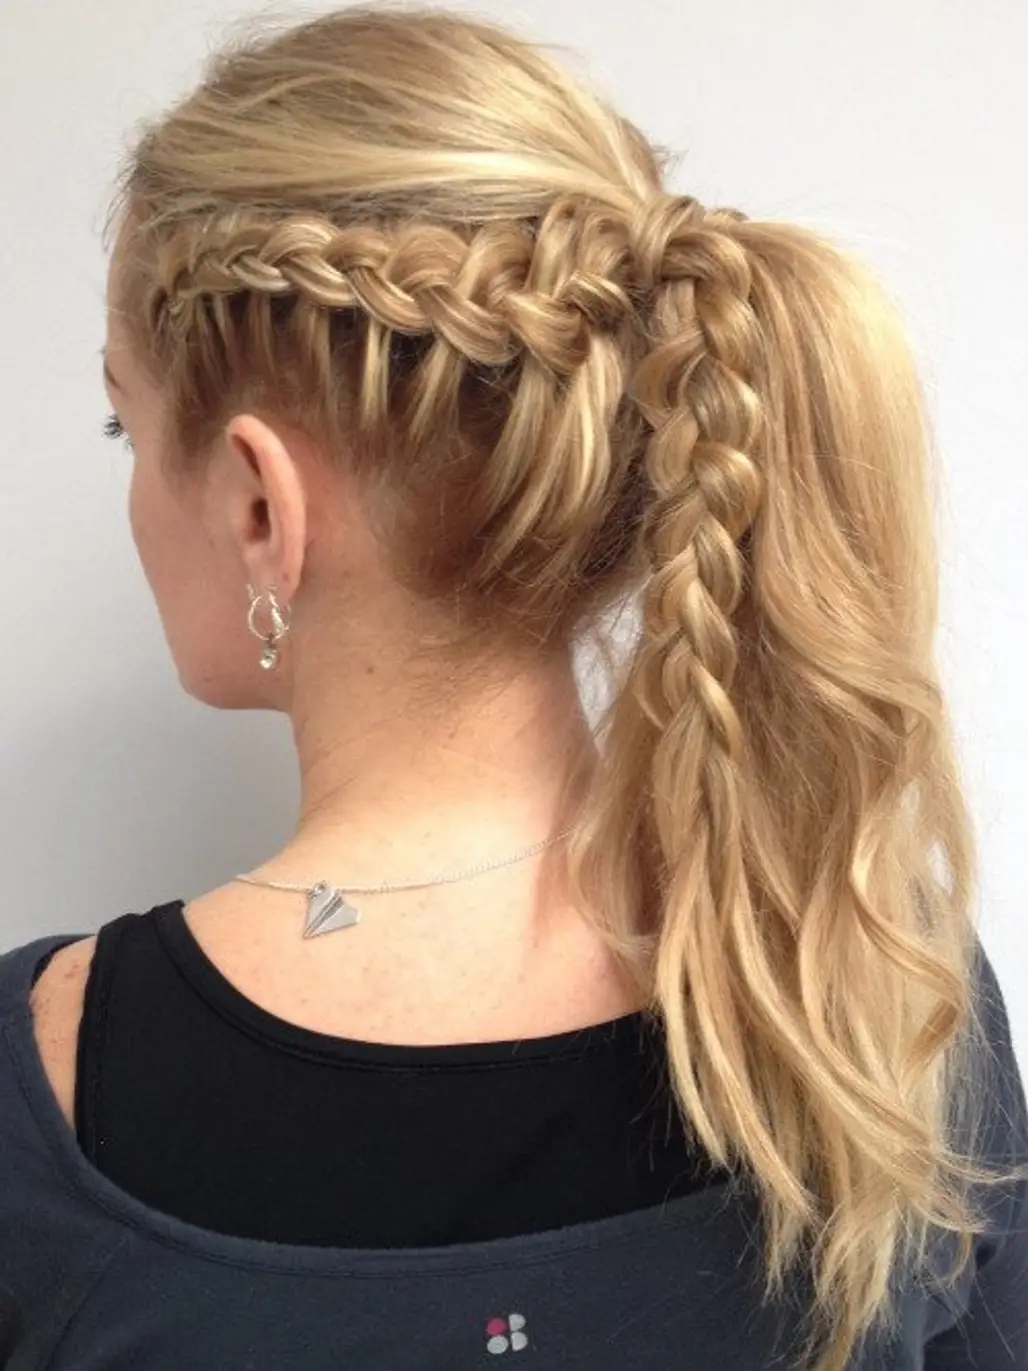 Try Braids for Your Run